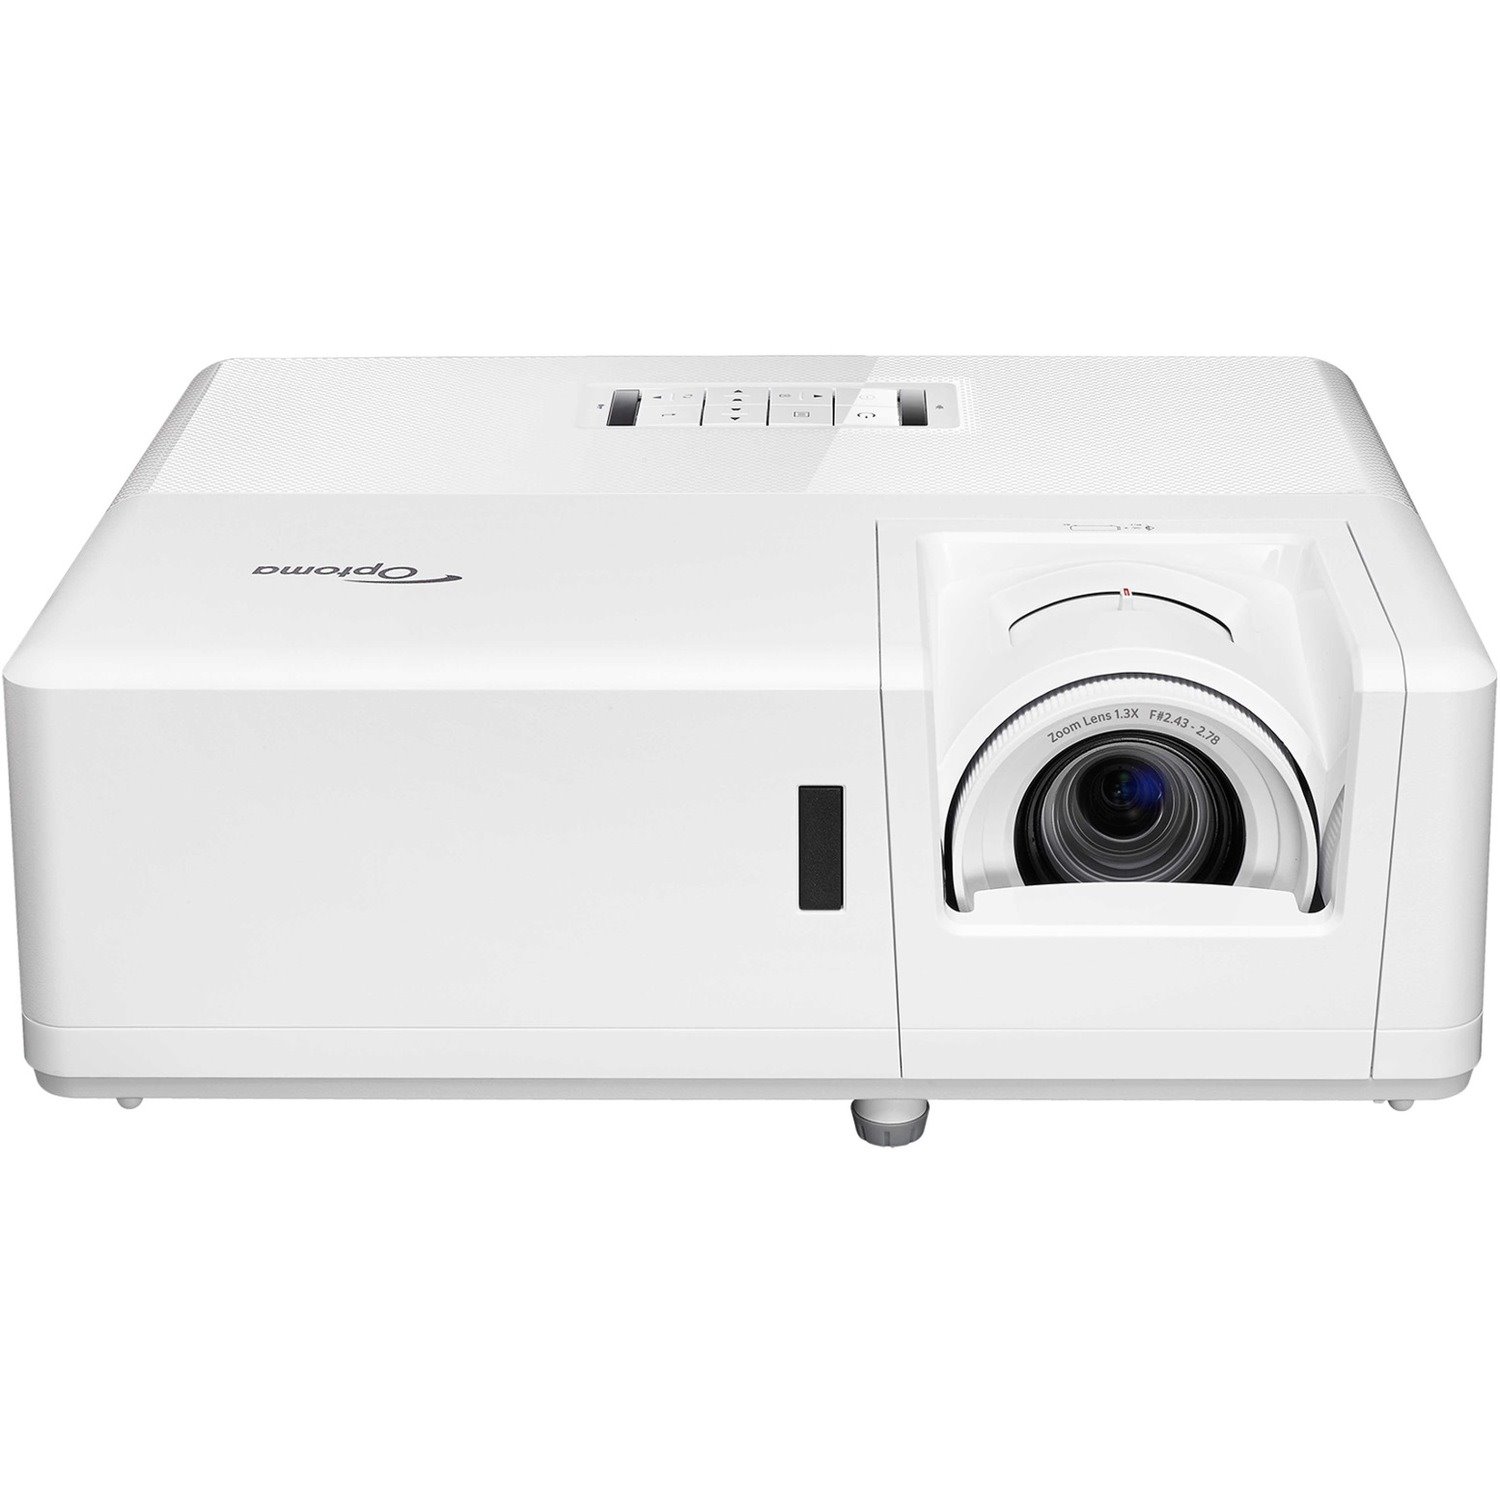 Optoma ZW350 3D DLP Projector - 16:10 - White